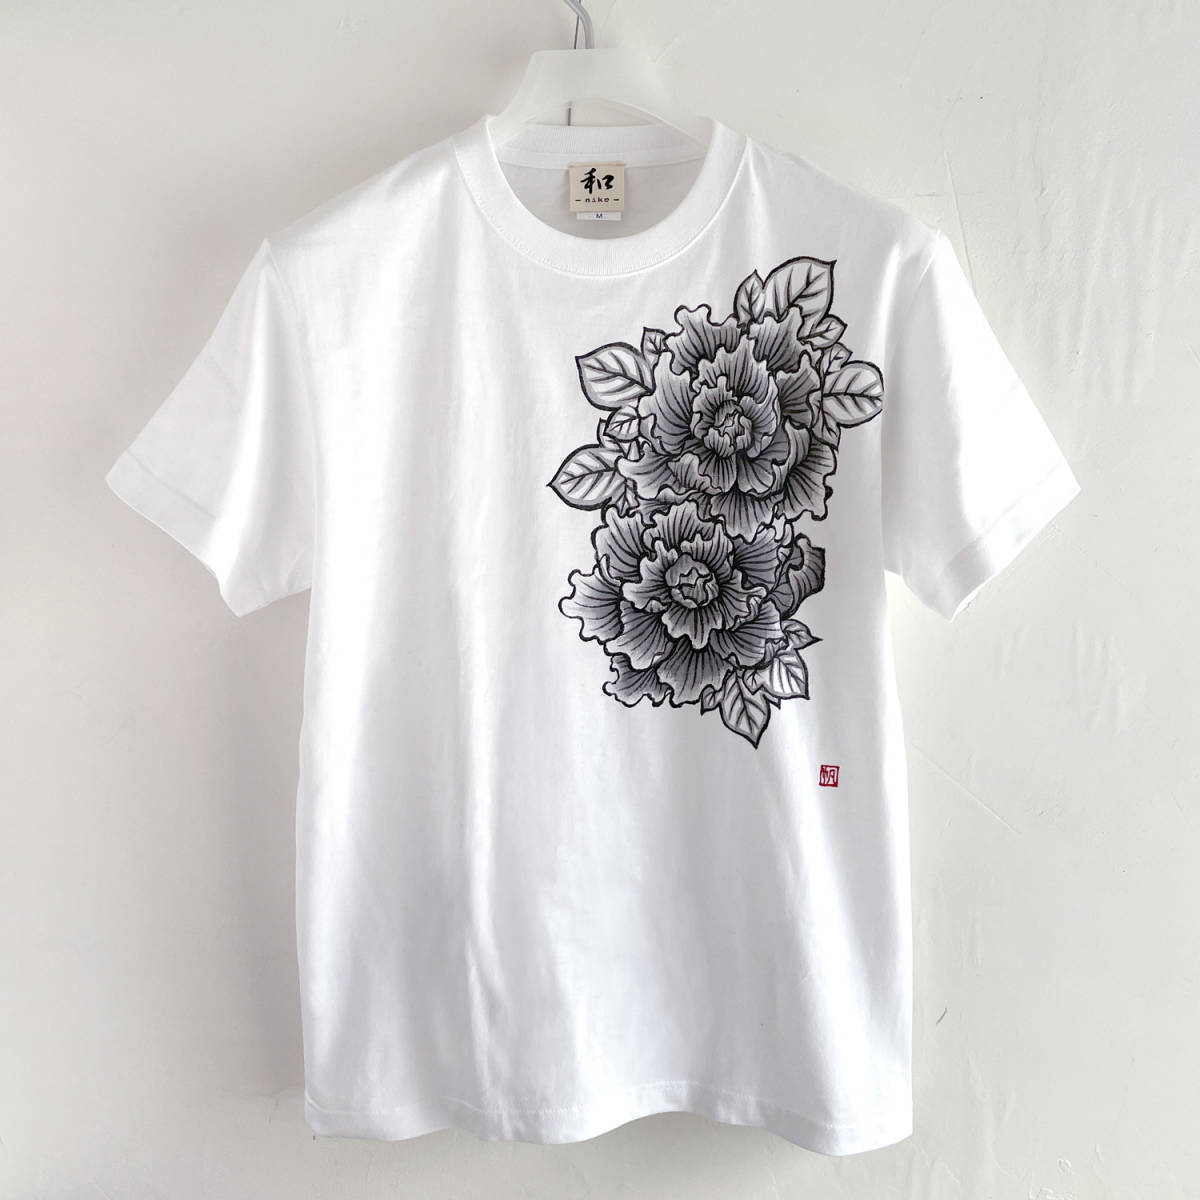 Men's T-shirt, size S, hand-painted peony pattern T-shirt, white, hand-painted peony floral pattern T-shirt, Japanese pattern, Small size, Crew neck, Patterned